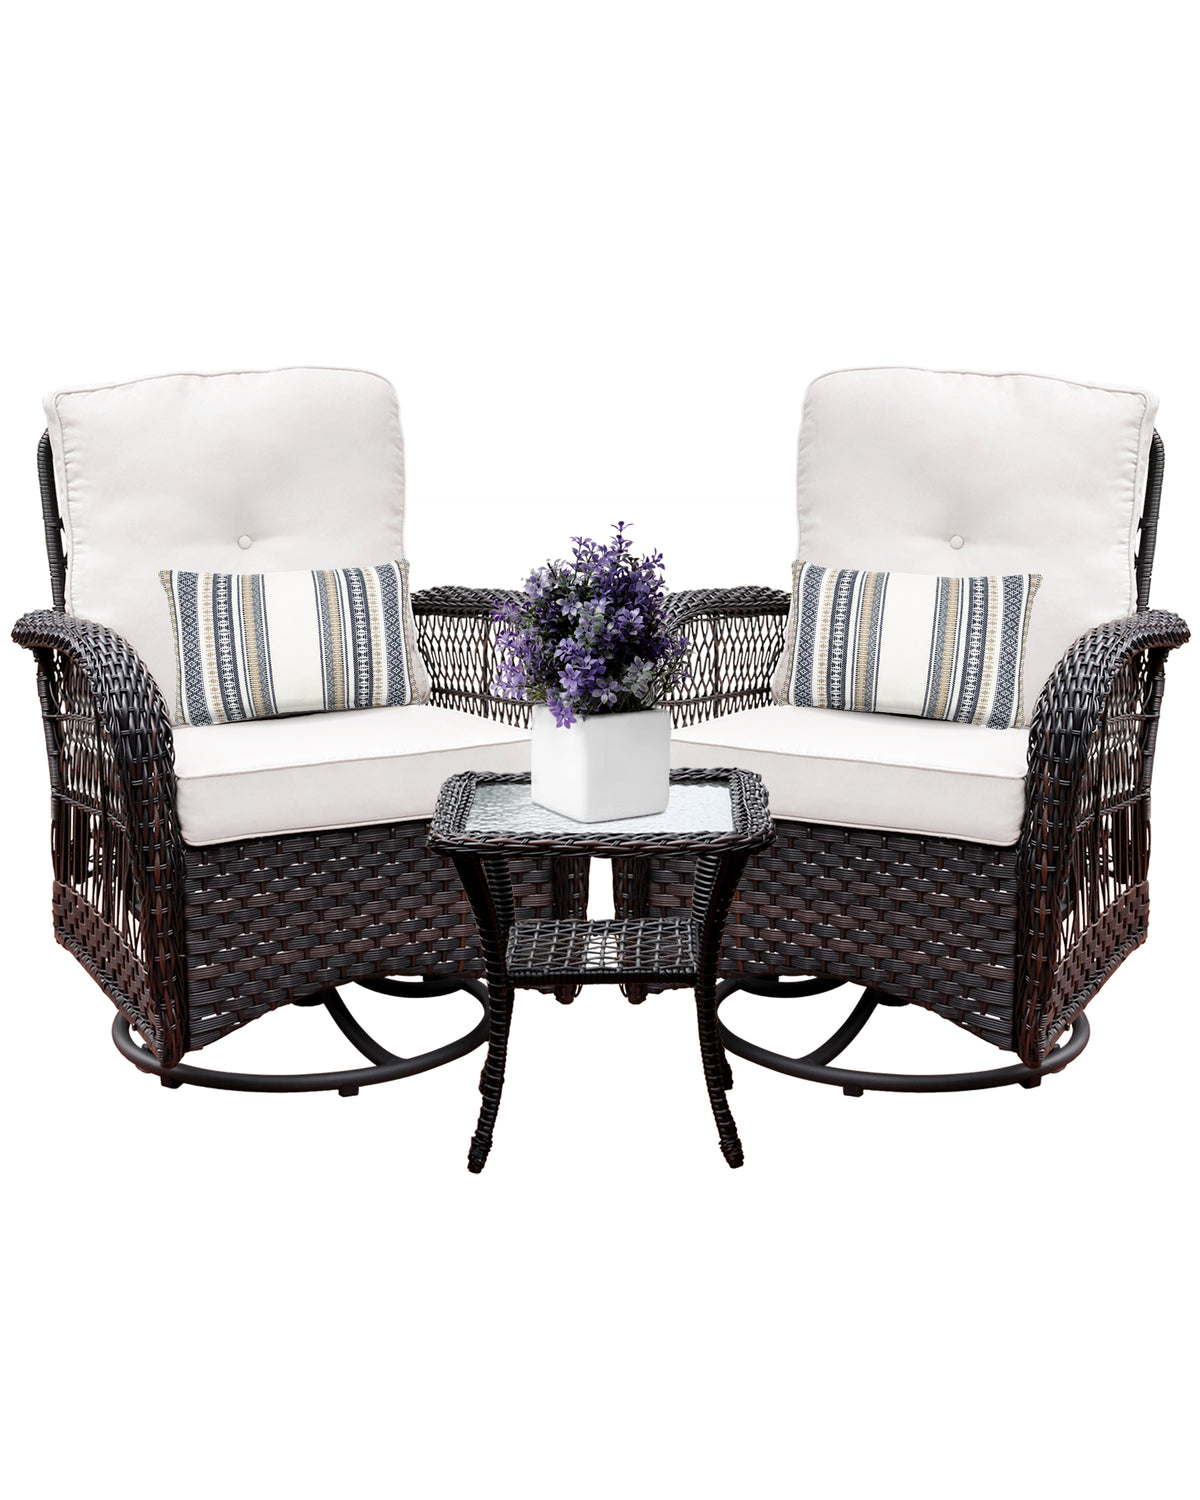 Swivel Rocker Patio Chairs Set of 2 with Matching Table- Beige cushion with Dark Brown Wicker